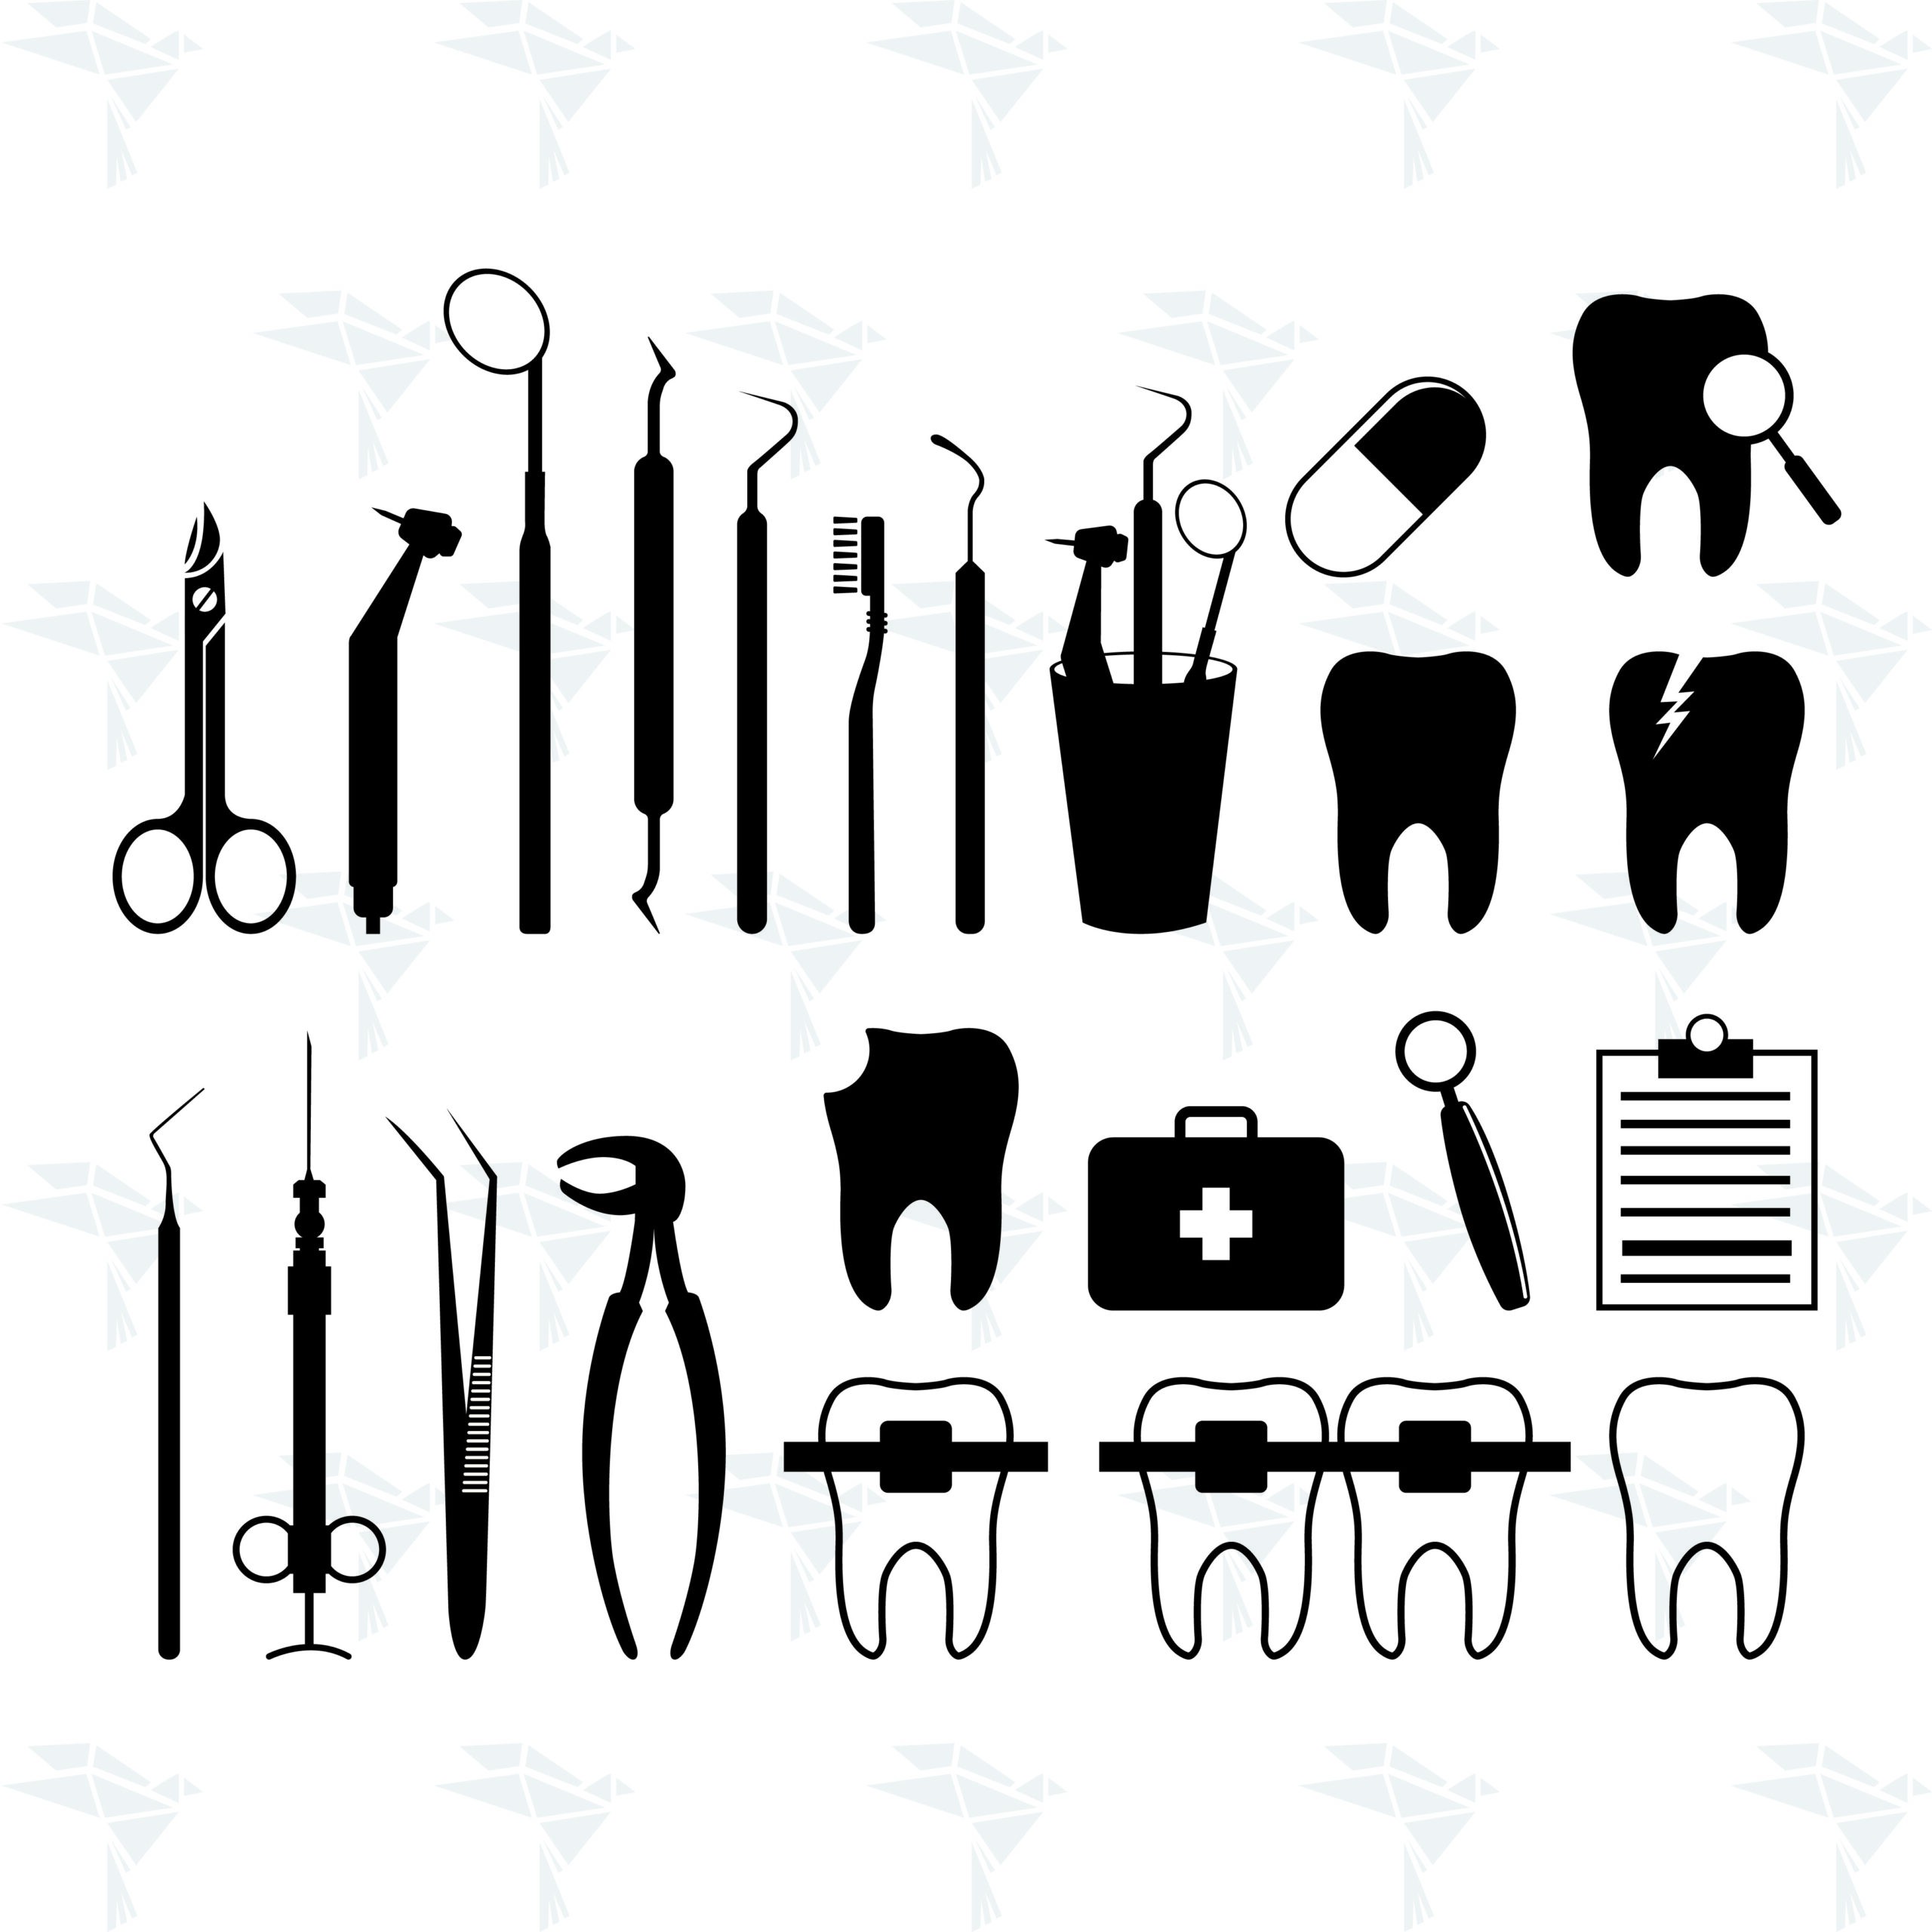 Dentist Tool SVG, PNG, DXF. Instant download files for Cricut Design Space,  Silhouette, Cutting, Printing, or more